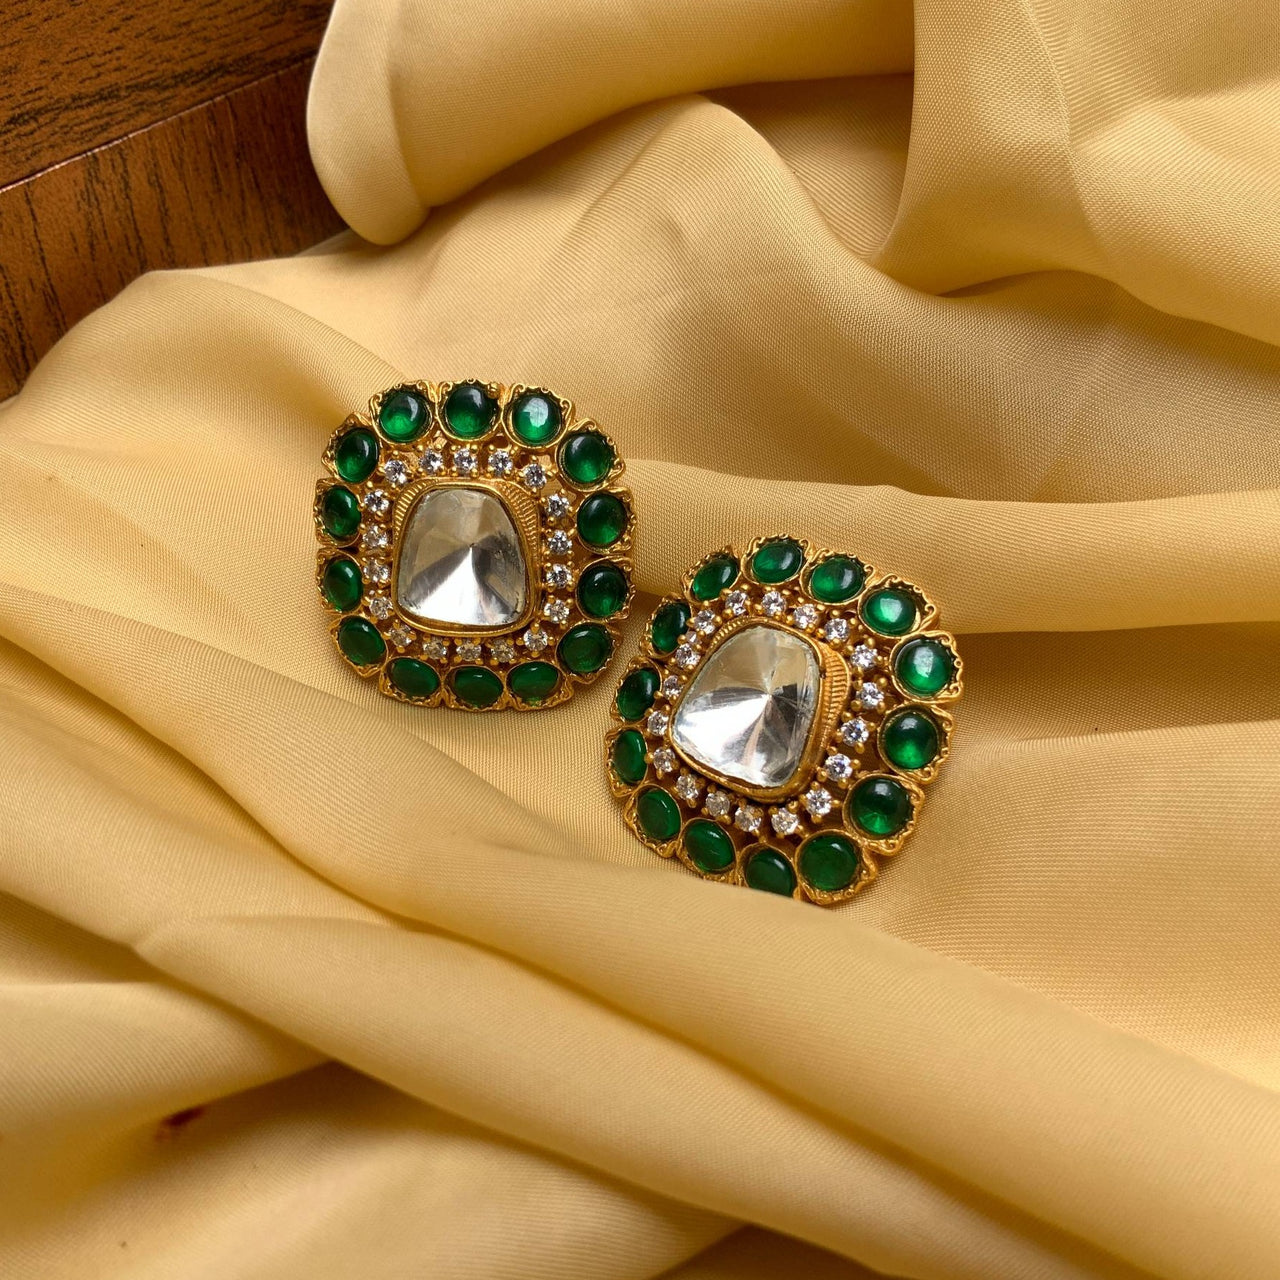 Ethnic Jhumka Earrings Gold Plated Kemp Stone Temple South Indian Jewelry |  eBay